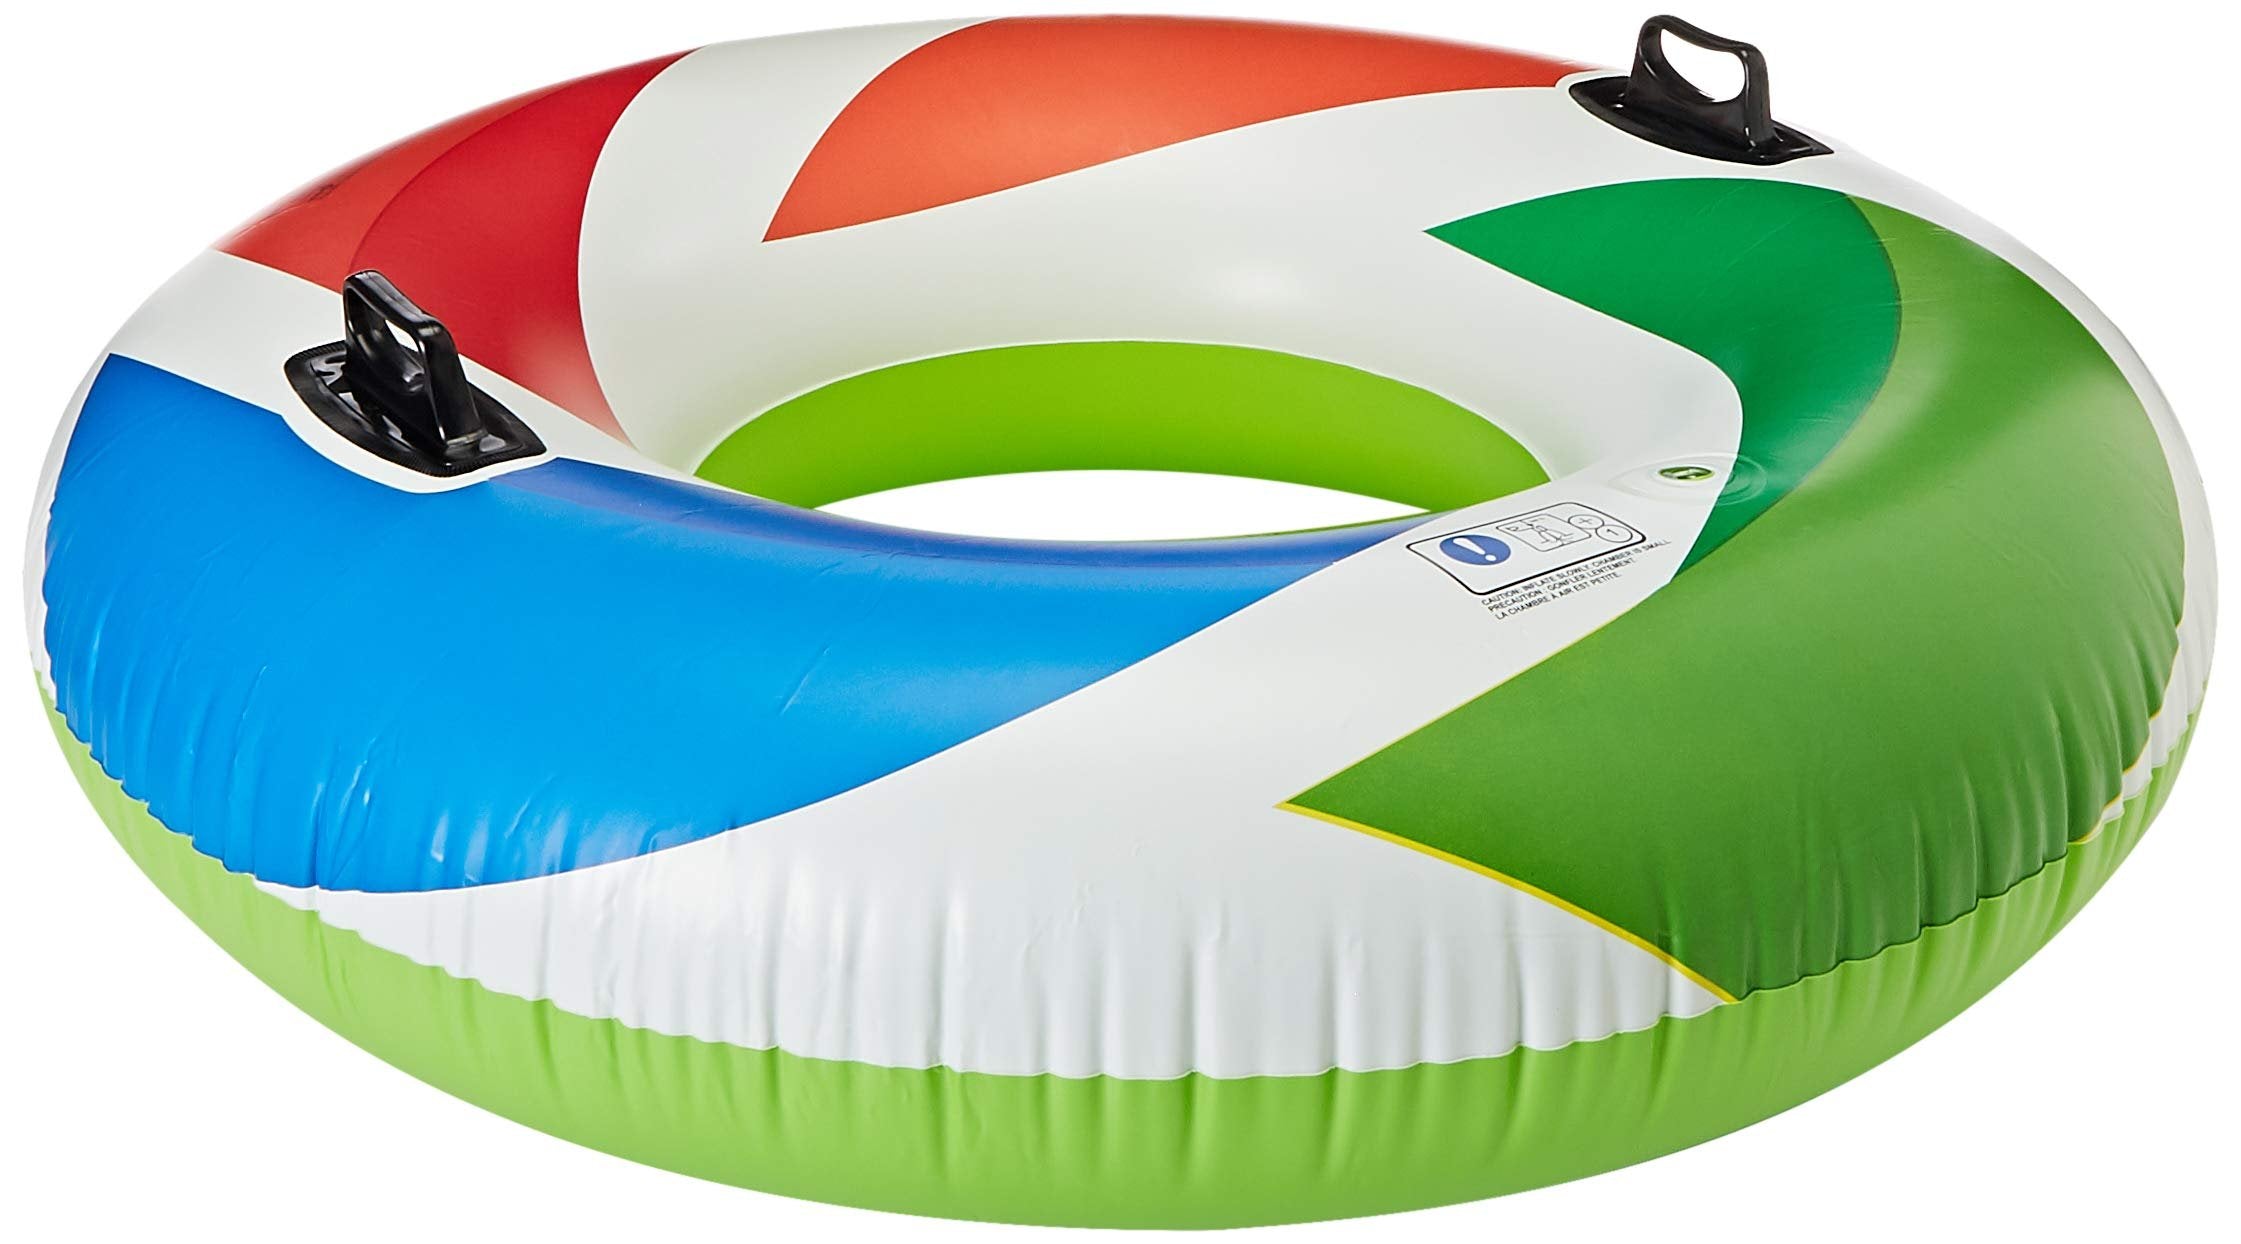 Intex Inflatable Color Whirl Floating Tube Raft w/ Handles (Set of 2) 48in 58202EP